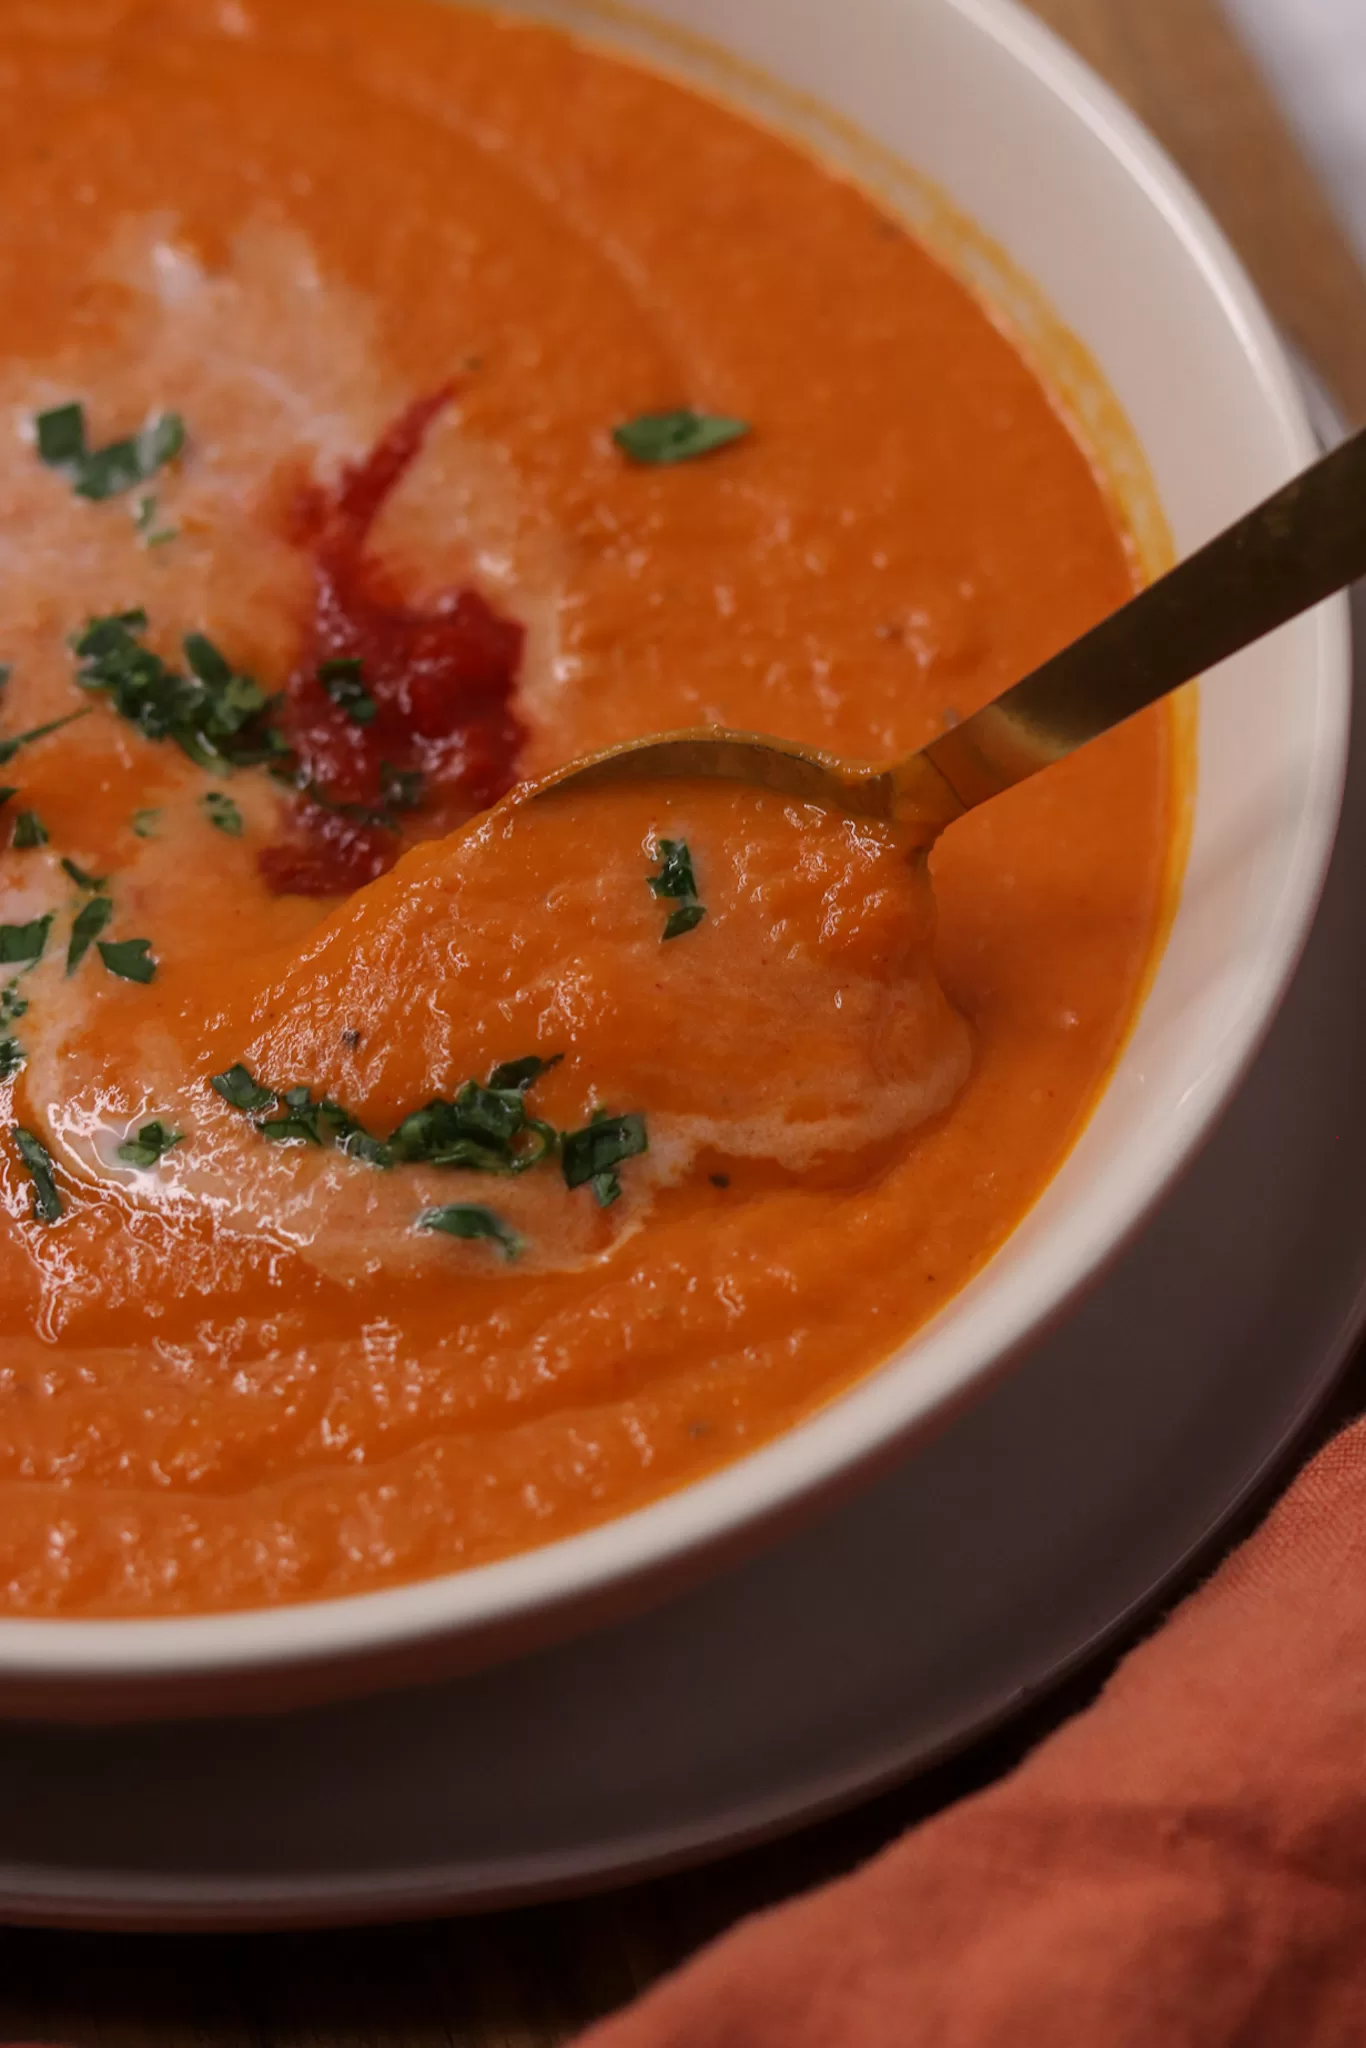 A spoon in a bowl of rich, creamy and vivid orange harissa roasted carrot soup.